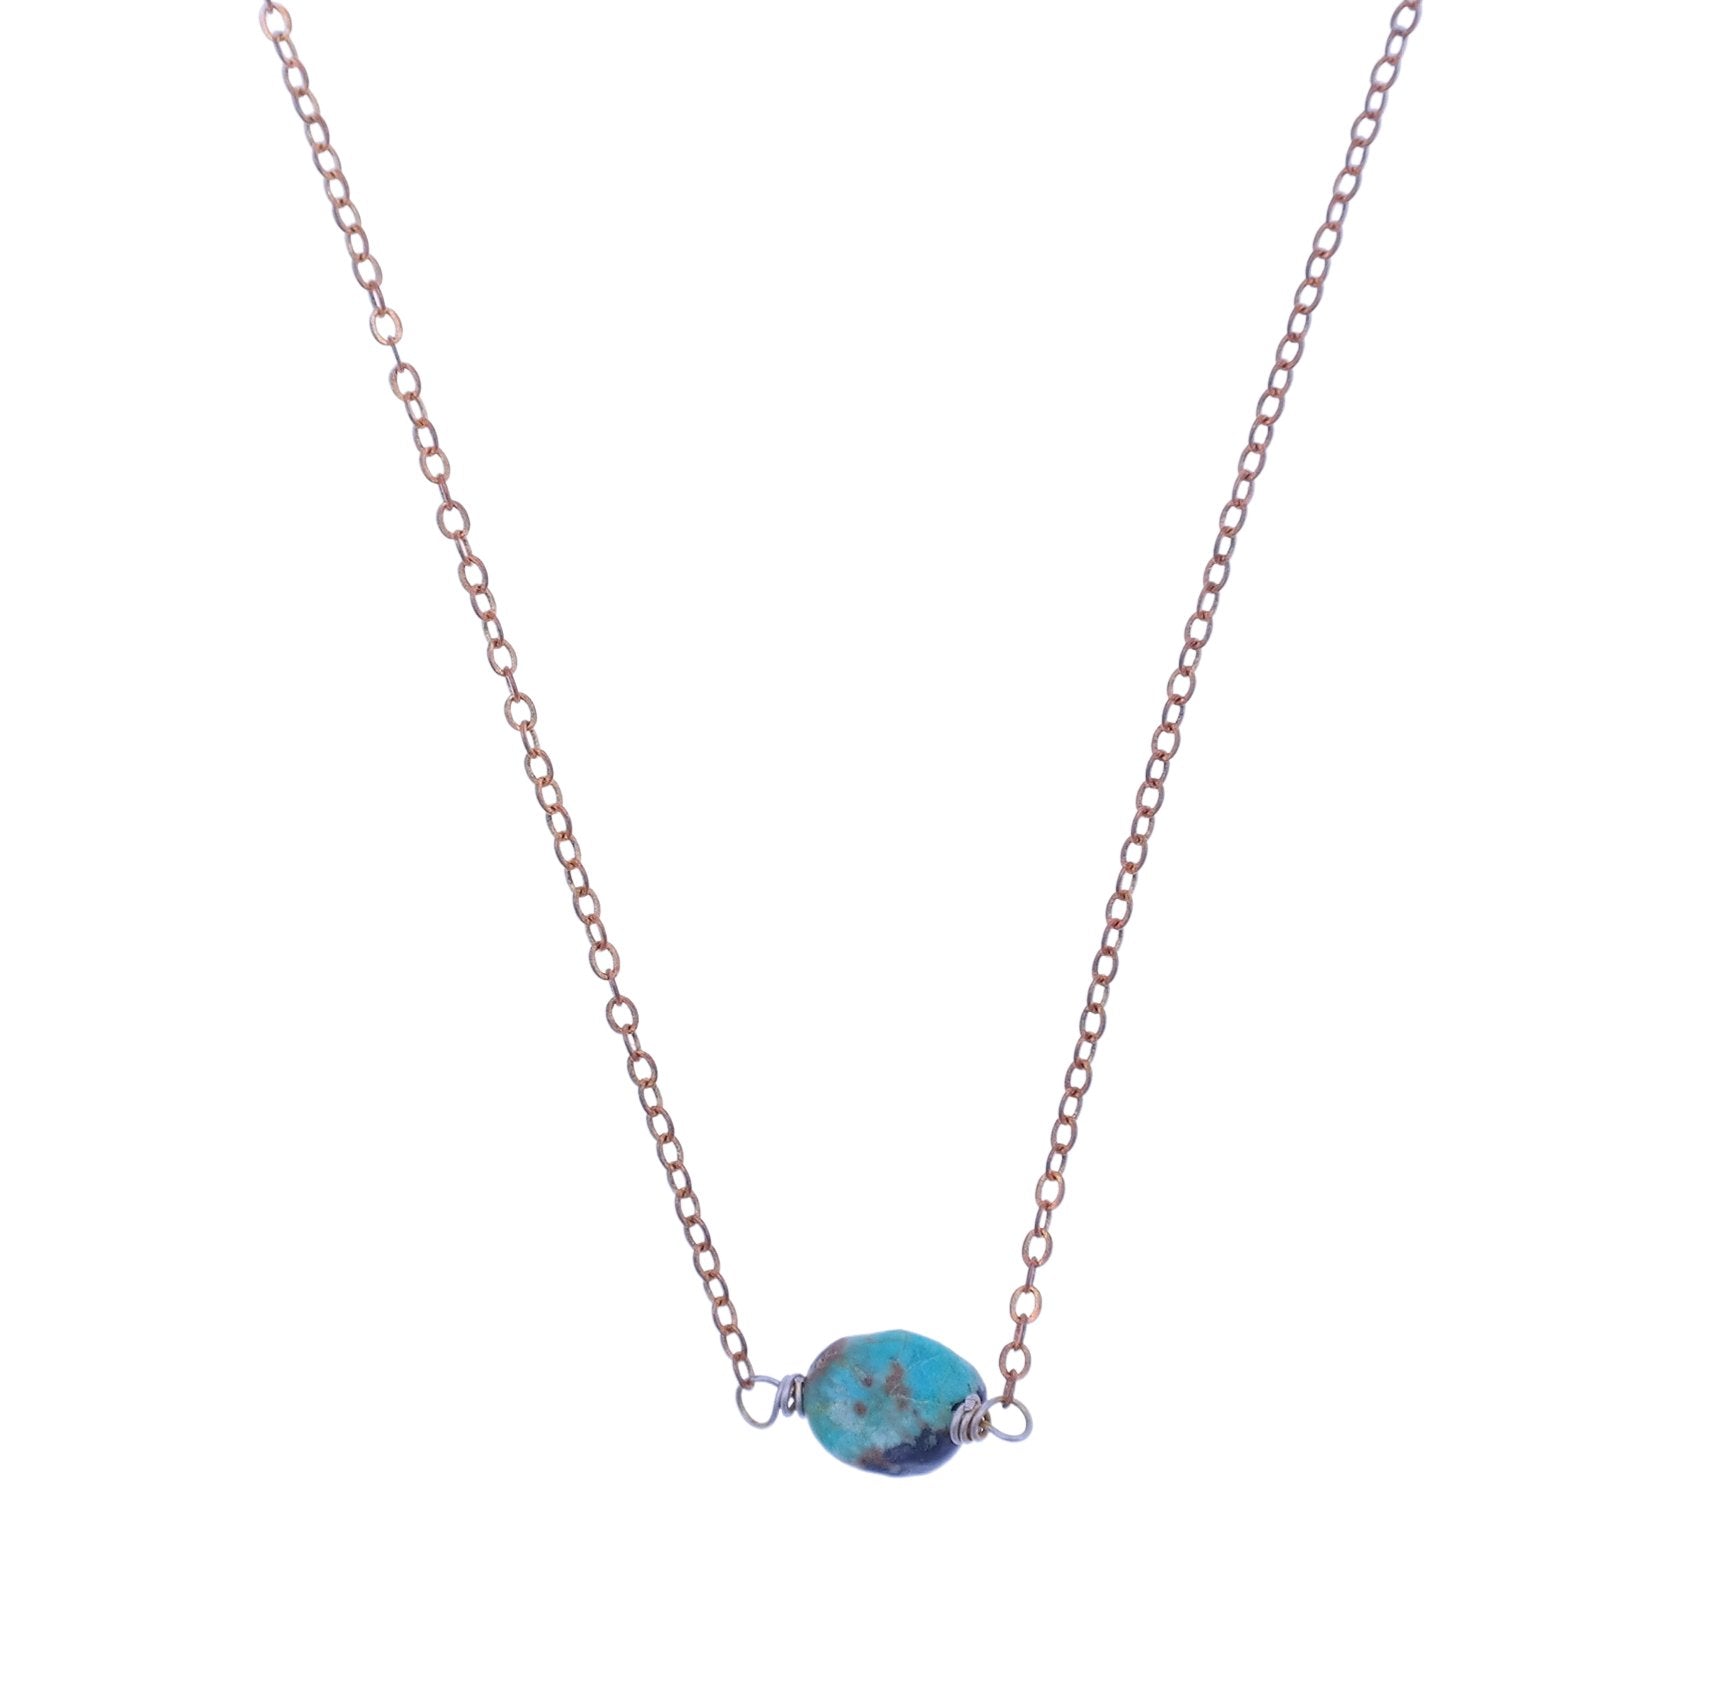 Short Necklace with Turquoise Stone - Gypsy Soul Jewellery